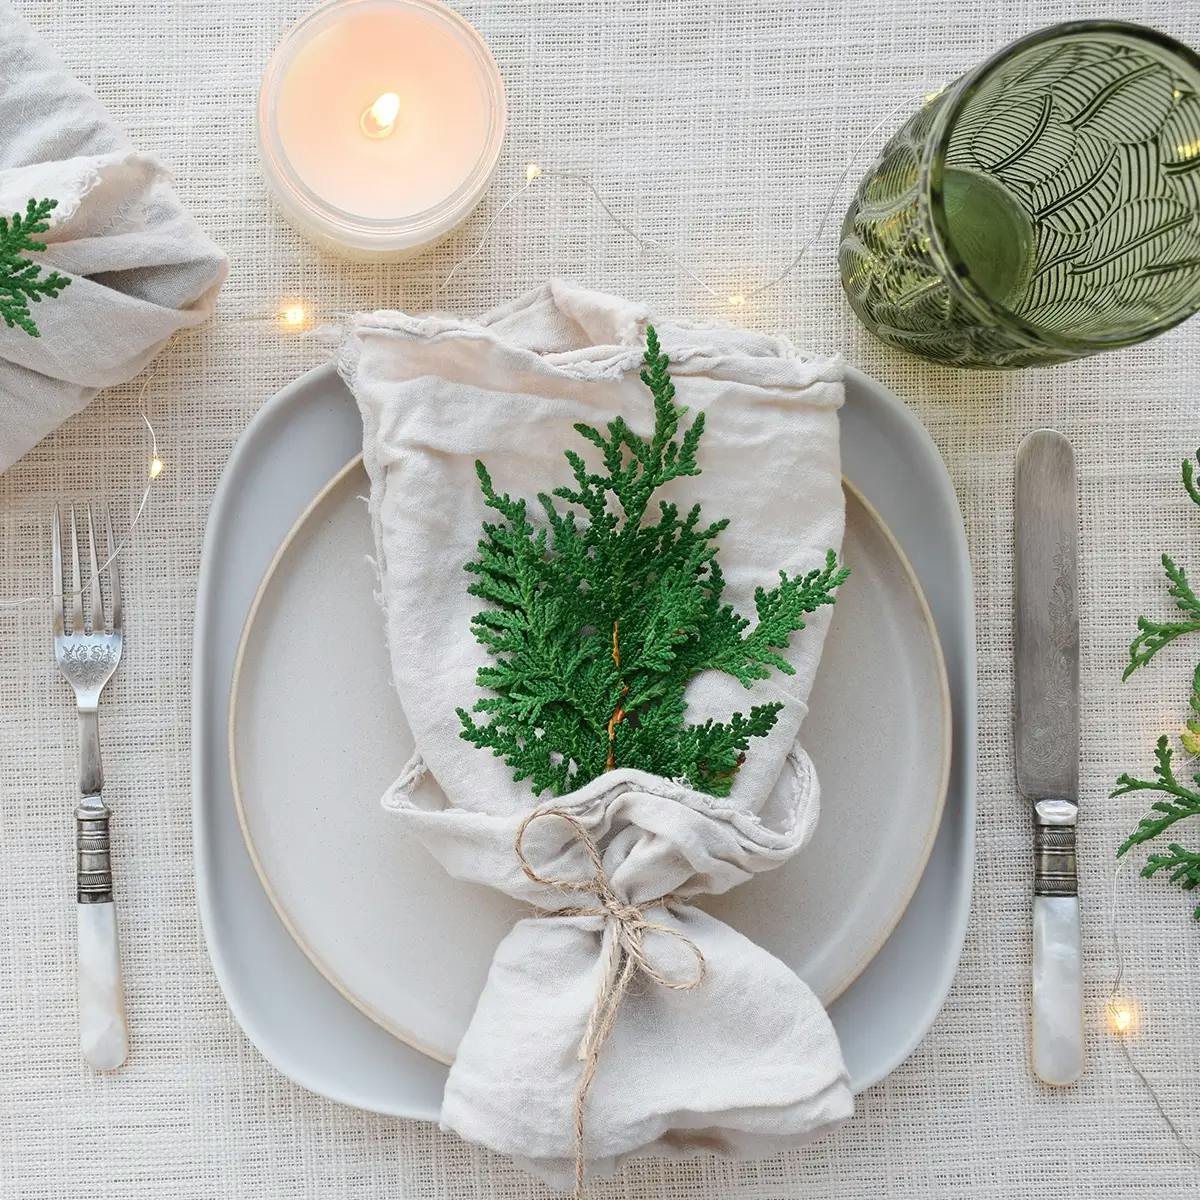 Eco-friendly holiday table setting with cloth napkin, cloth-wrapped gift, and pine decorations.